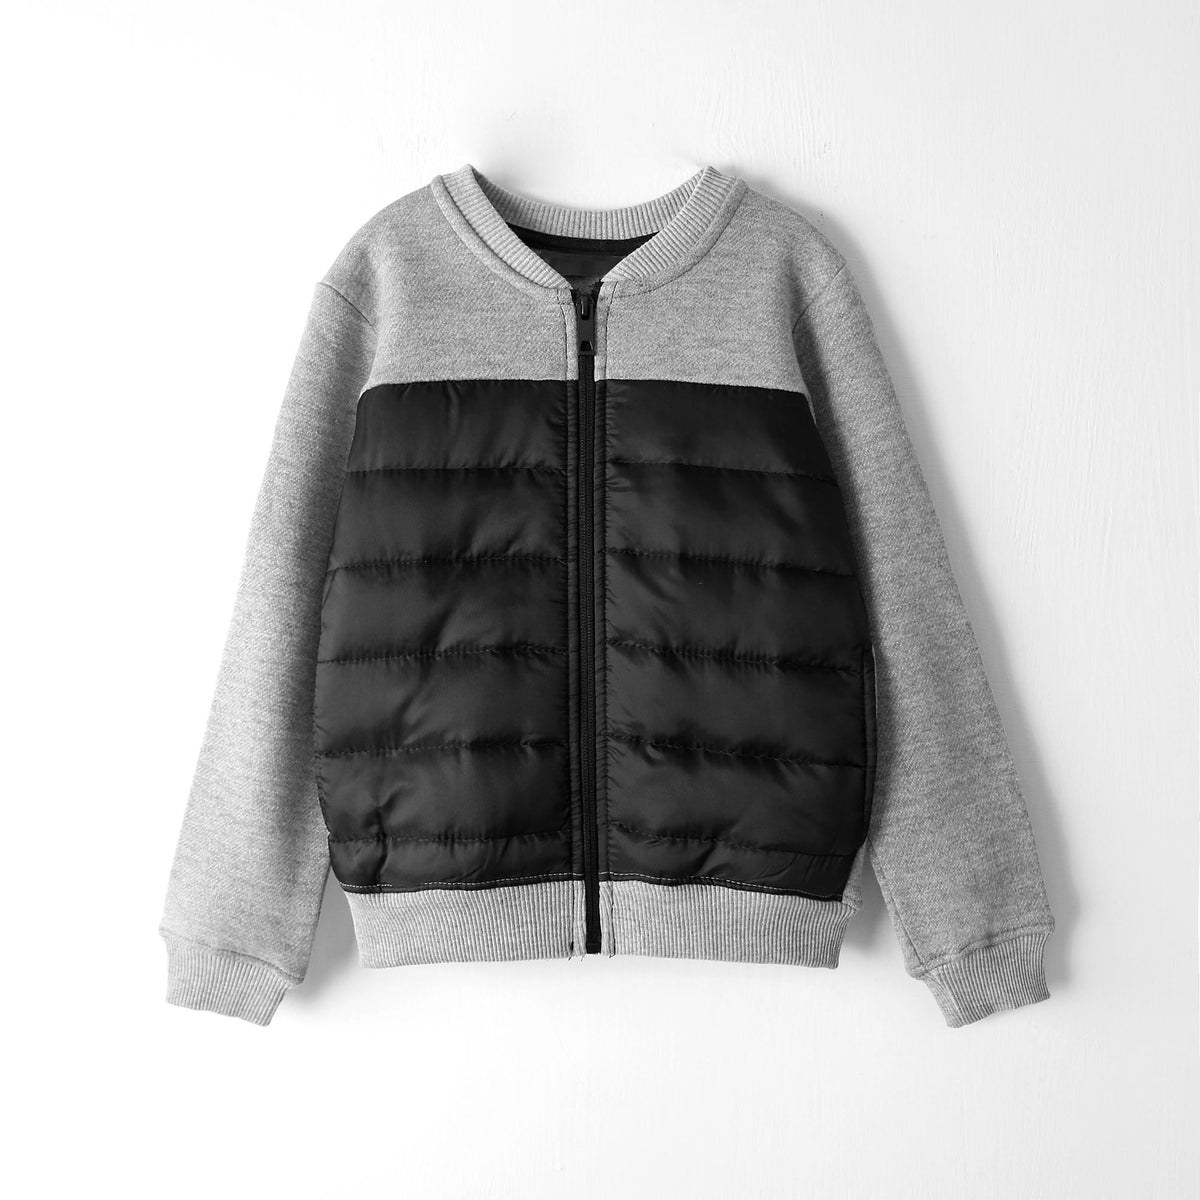 Kids Premium Quality Parachute Quilted Paneled Gray Fleece Jacket